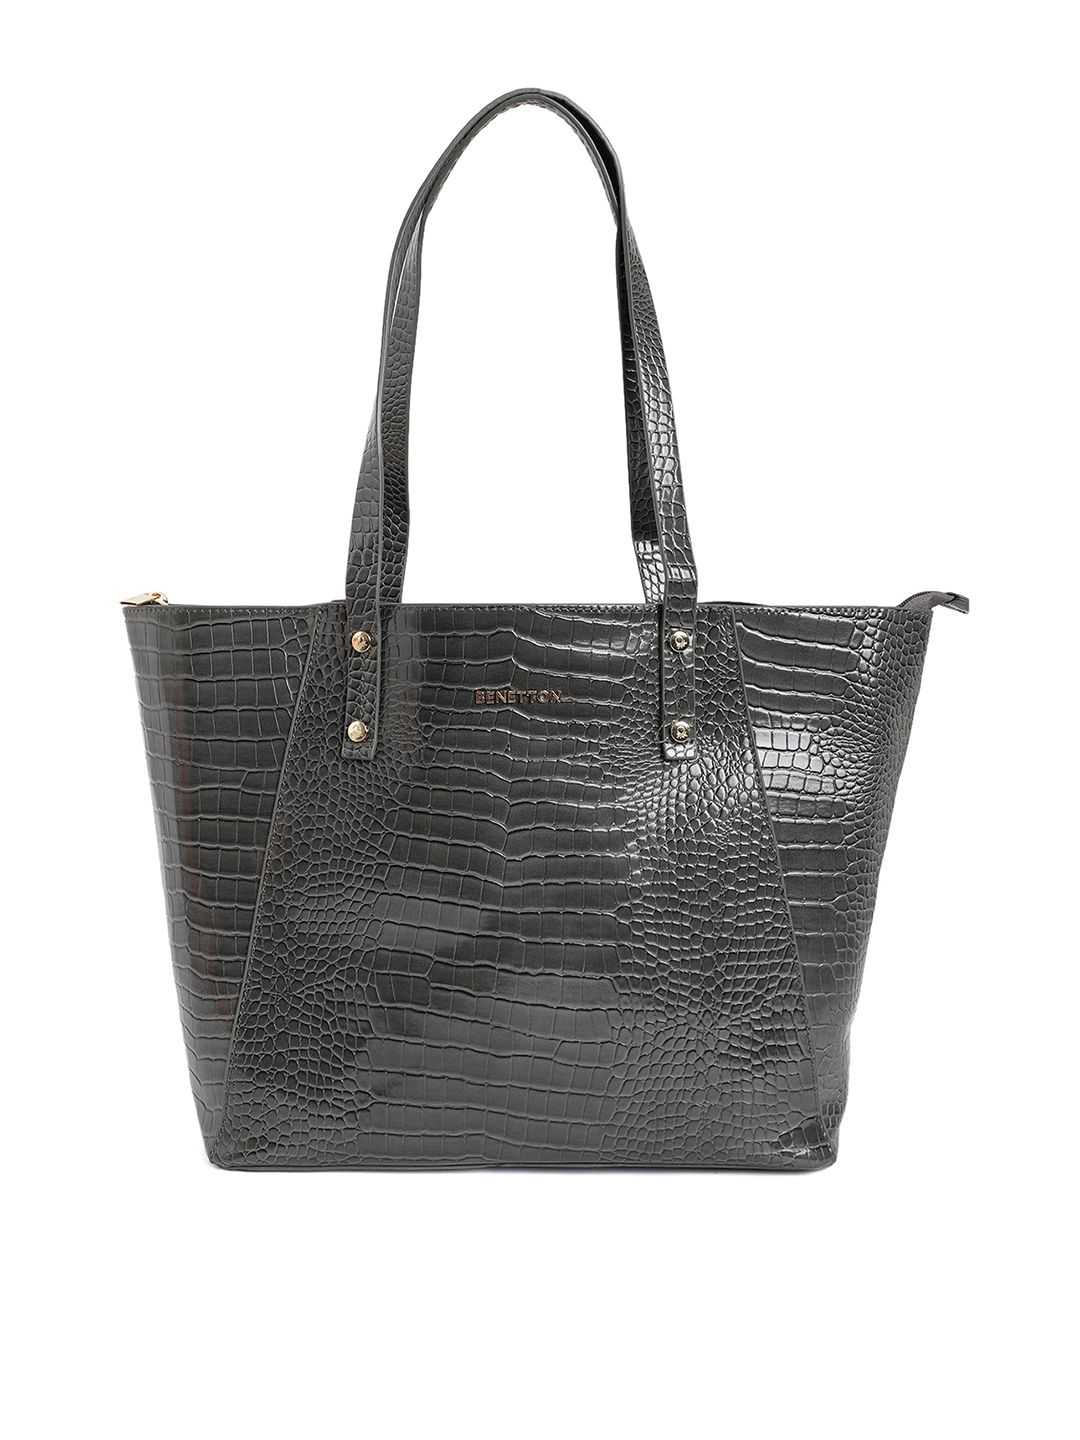 United Colors of Benetton Charcoal Animal Textured Structured Shoulder Bag Price in India